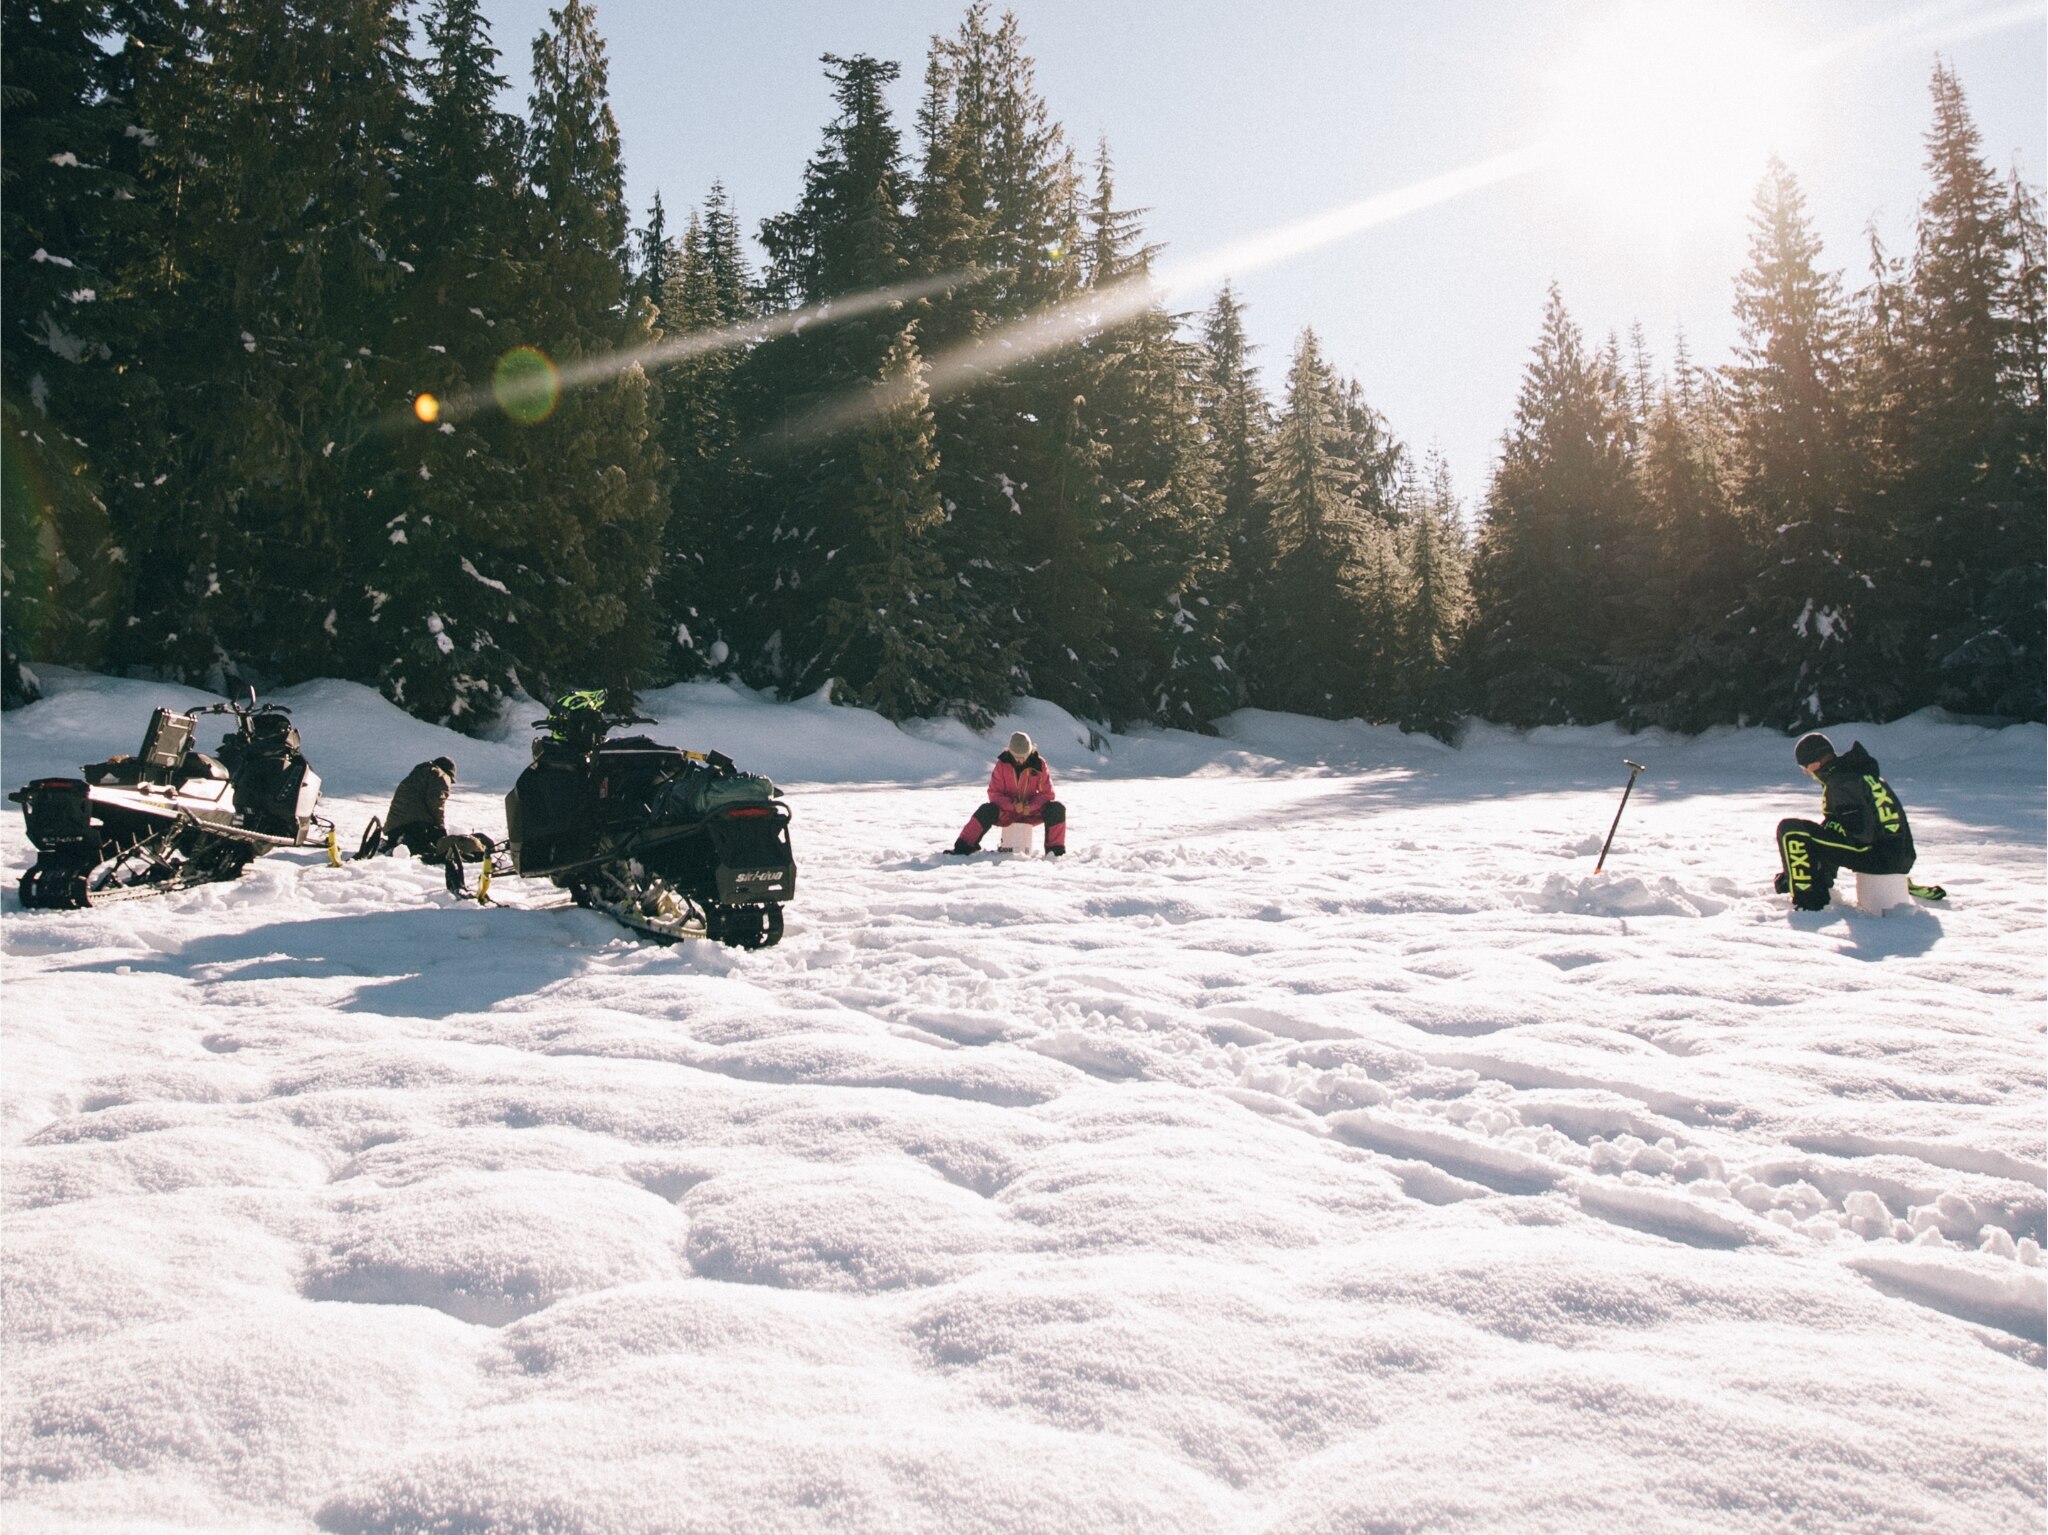 Enjoy a Ski-Doo and ice fishing adventure in glorious Whistler, BC